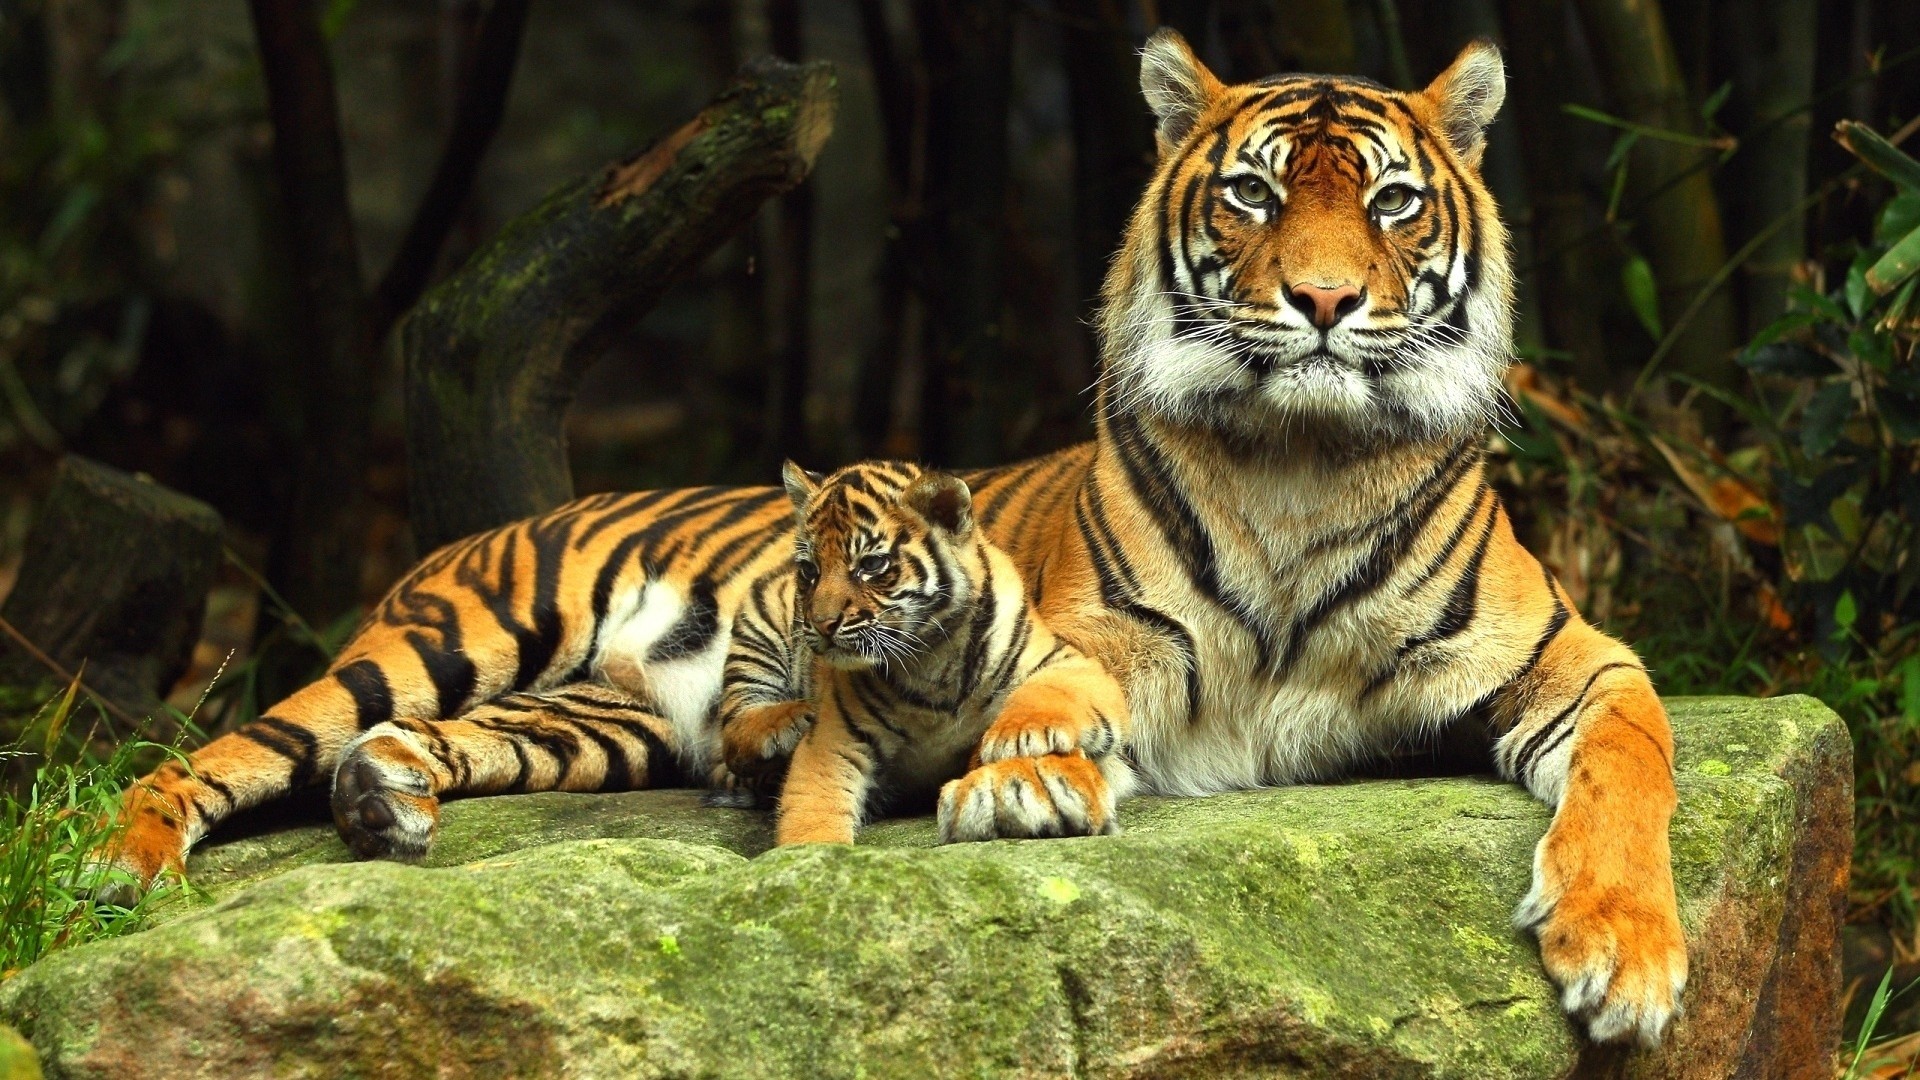 1920x1080 Explore Hd Images, Pictures Images, and more! Tiger Desktop Backgrounds